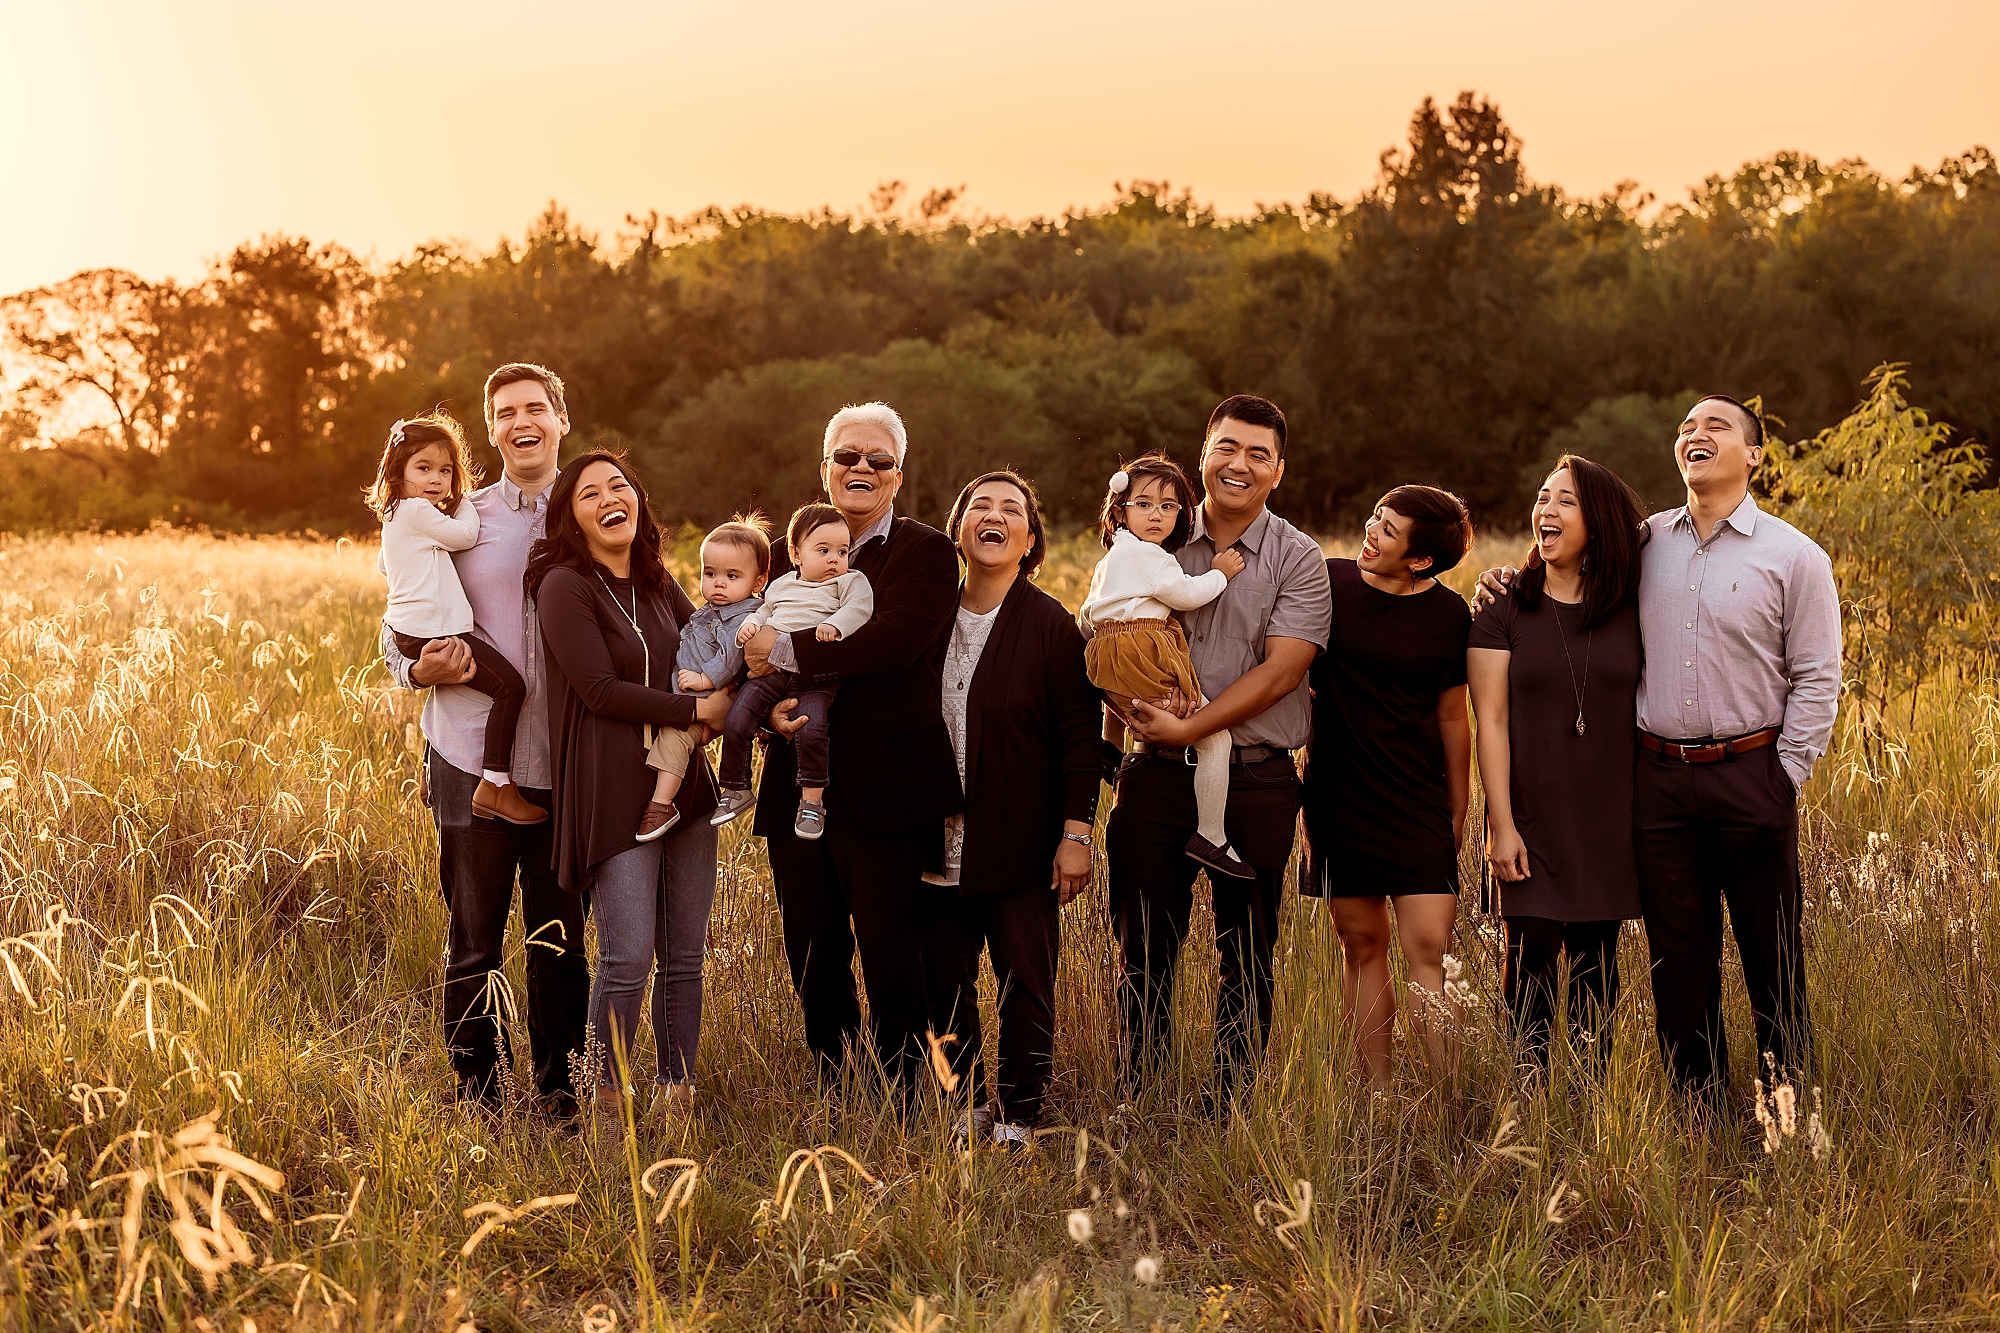 Fun Poses For Family Portraits » Read Now!